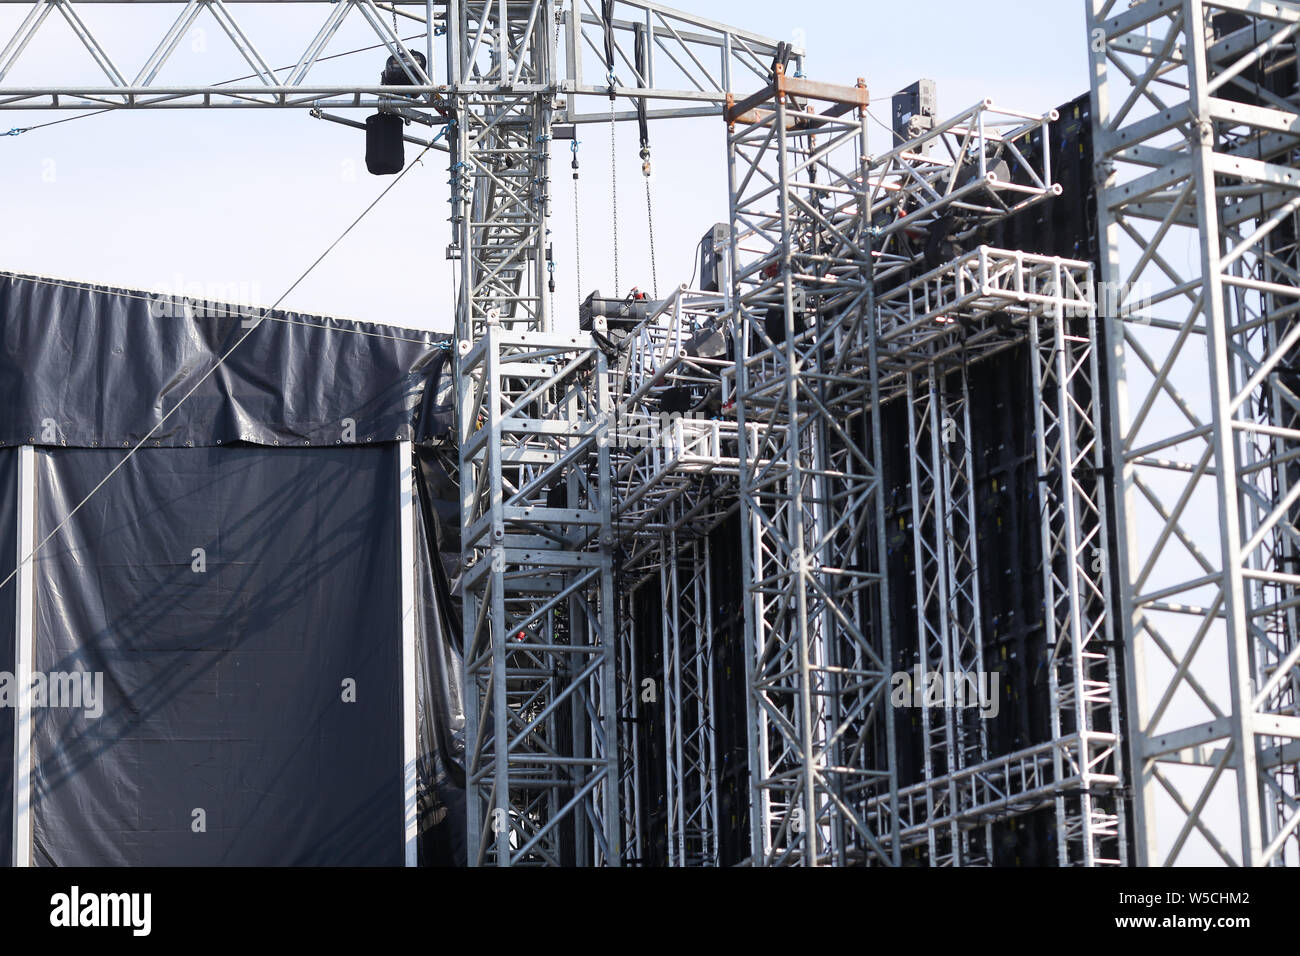 Details with the metallic structure of a large concert stage seen from behind, at a music festival Stock Photo